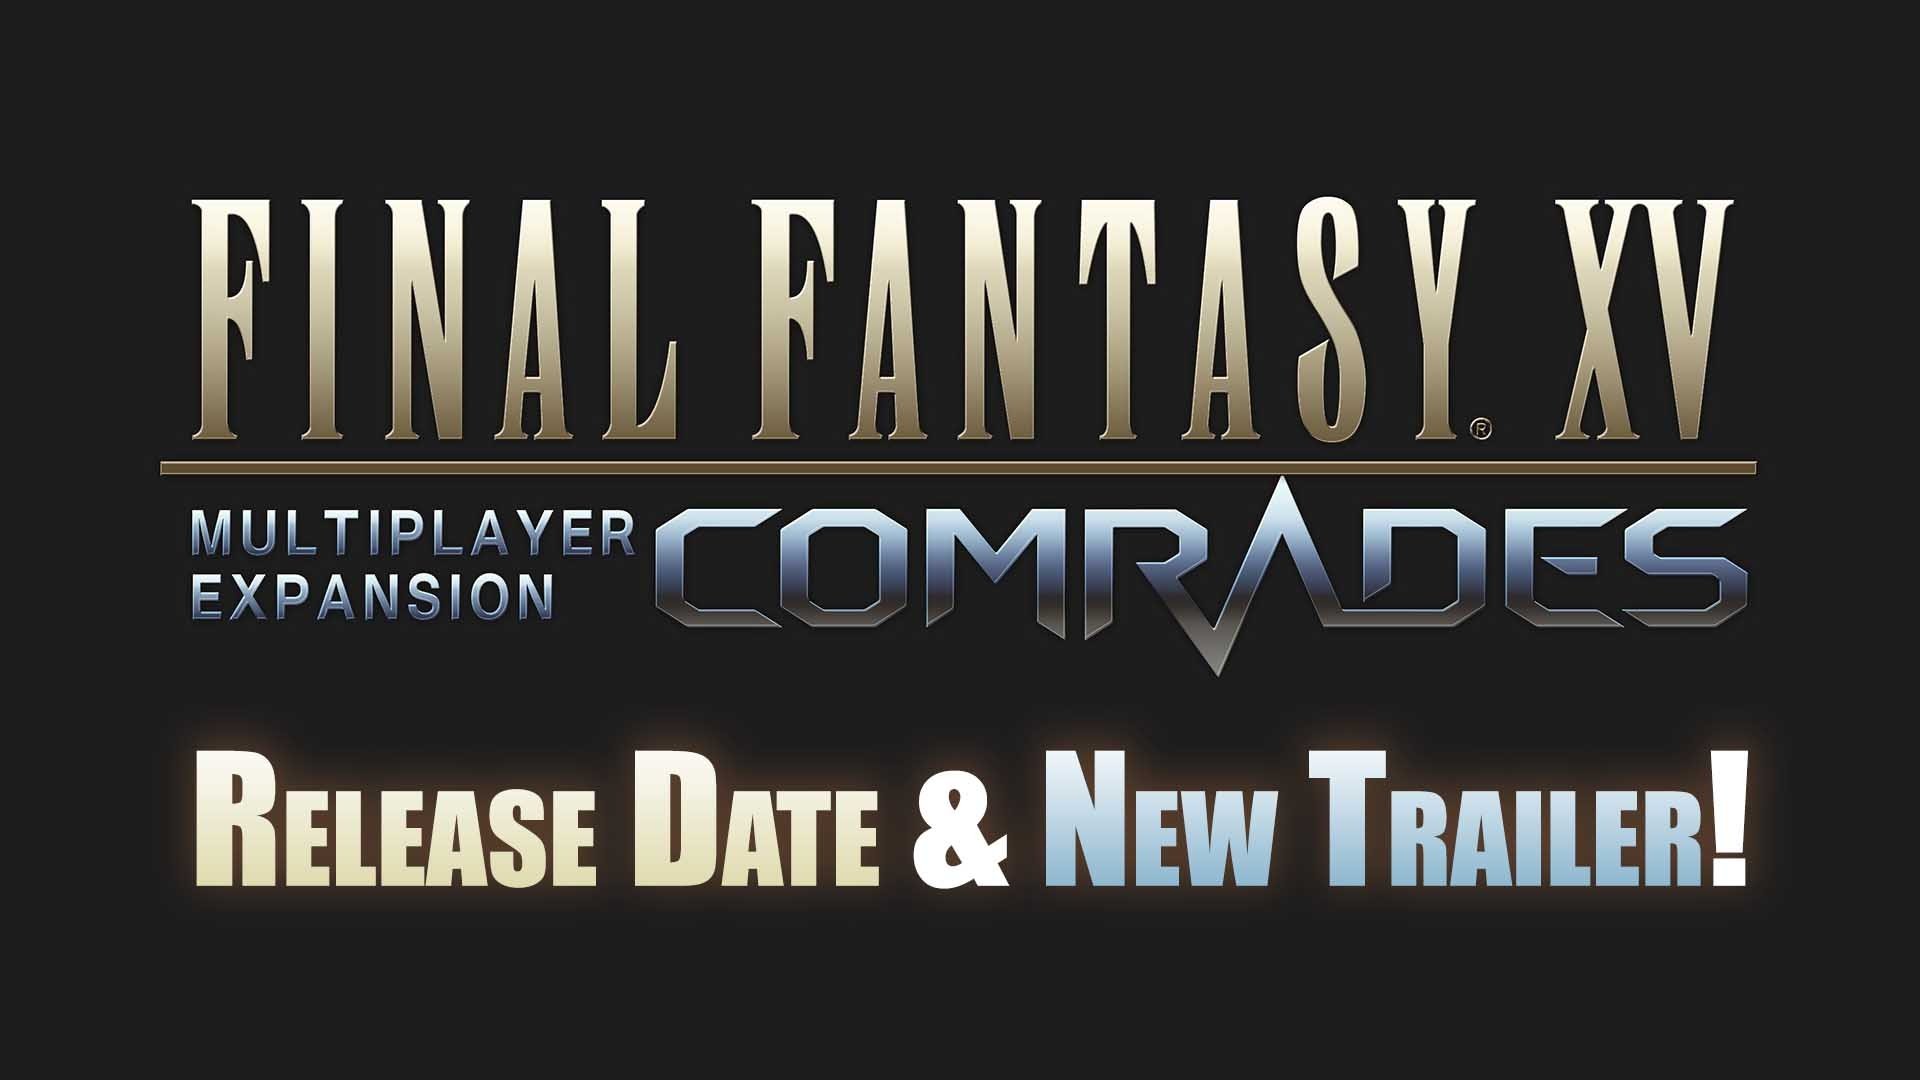 ffxv-final fantasy-15-xv-online-multiplayer-expansion-comrades-ps4-xbox-one-release-date-trailer